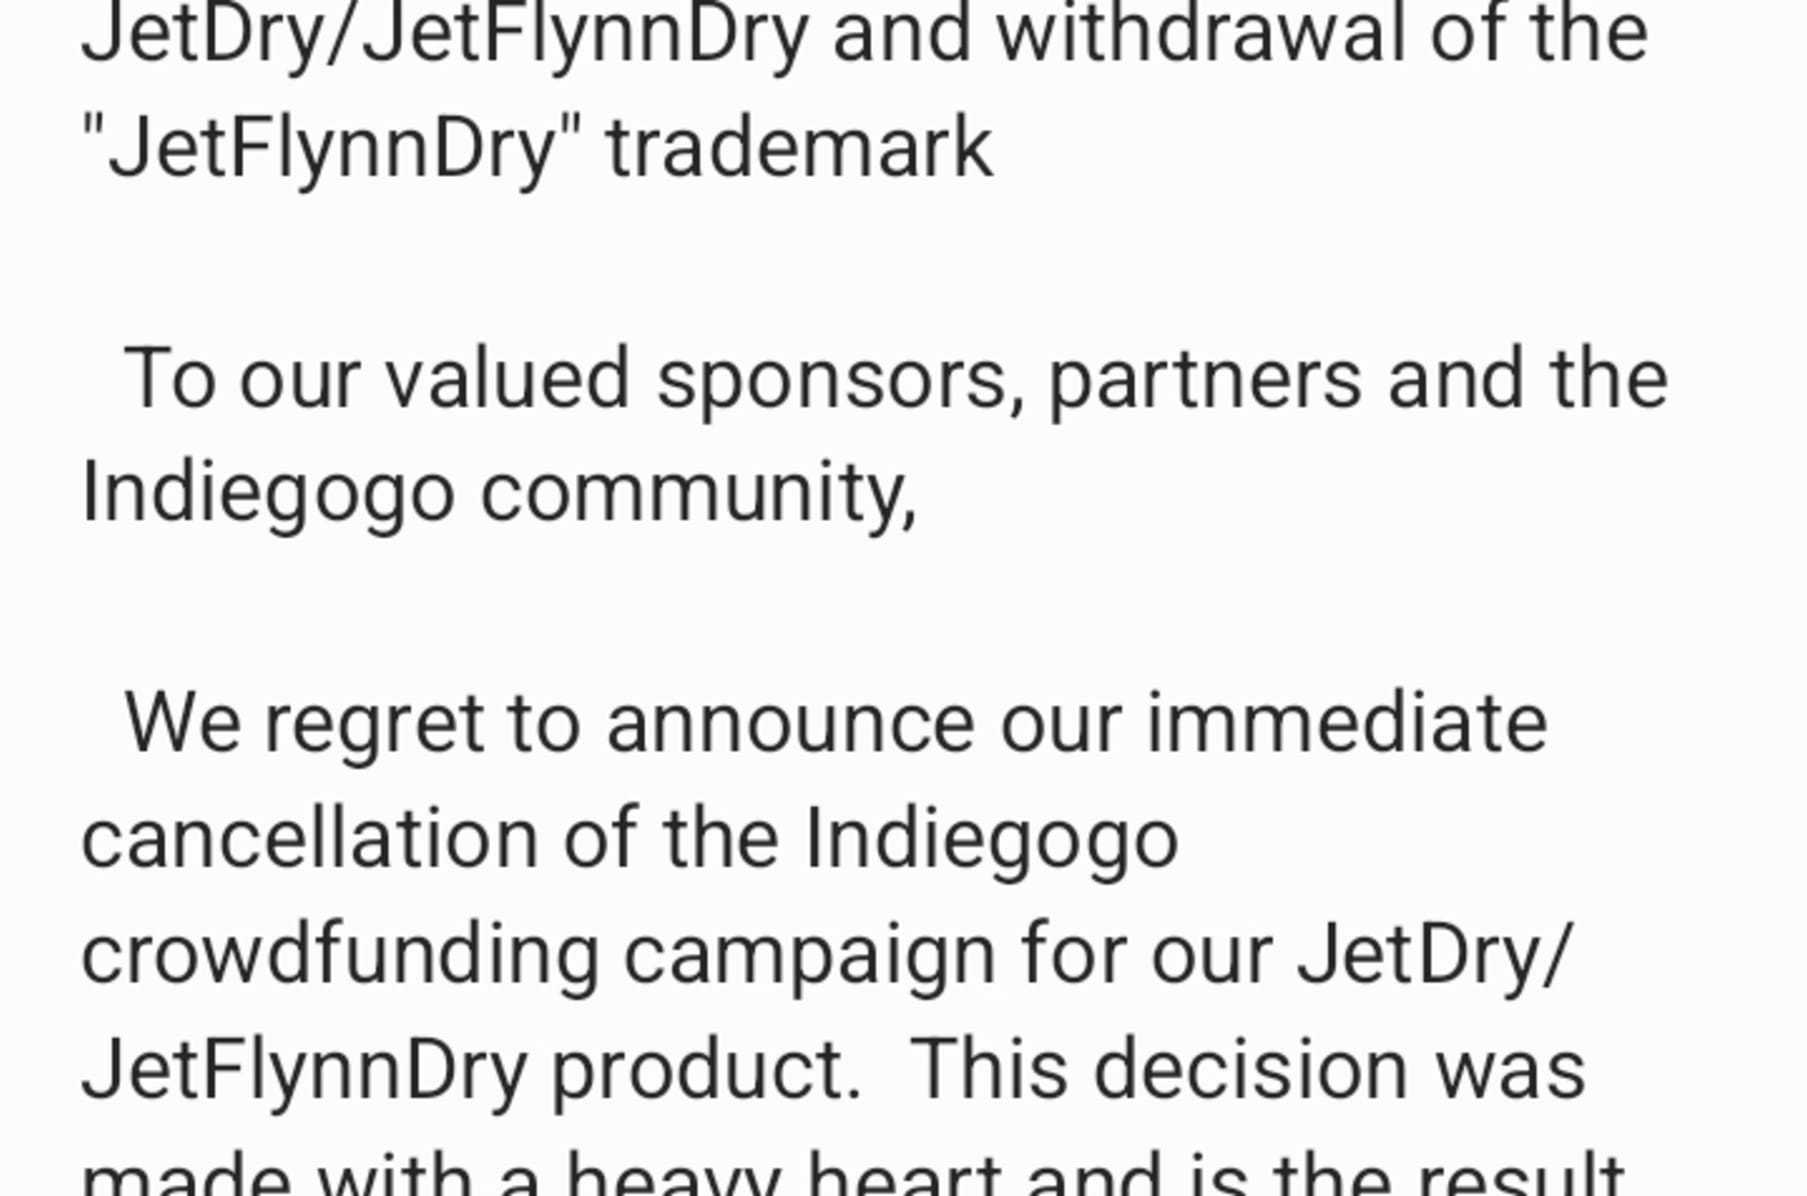 cancellation of the campaign JetFlynnDry